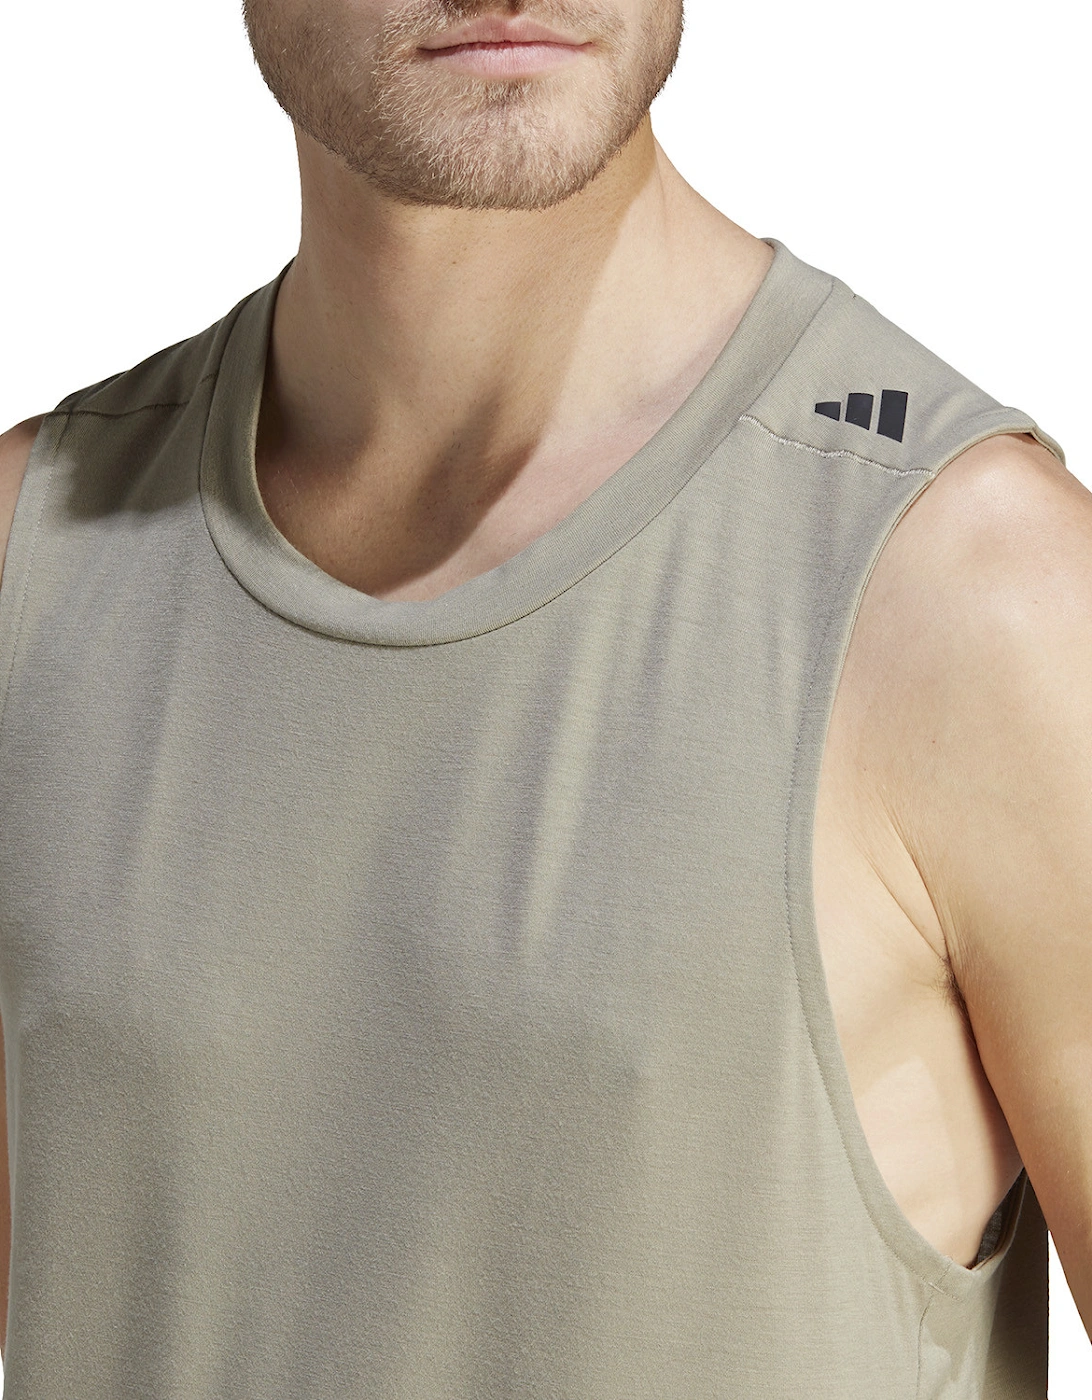 Mens D4 Training Tank Top (Taupe)